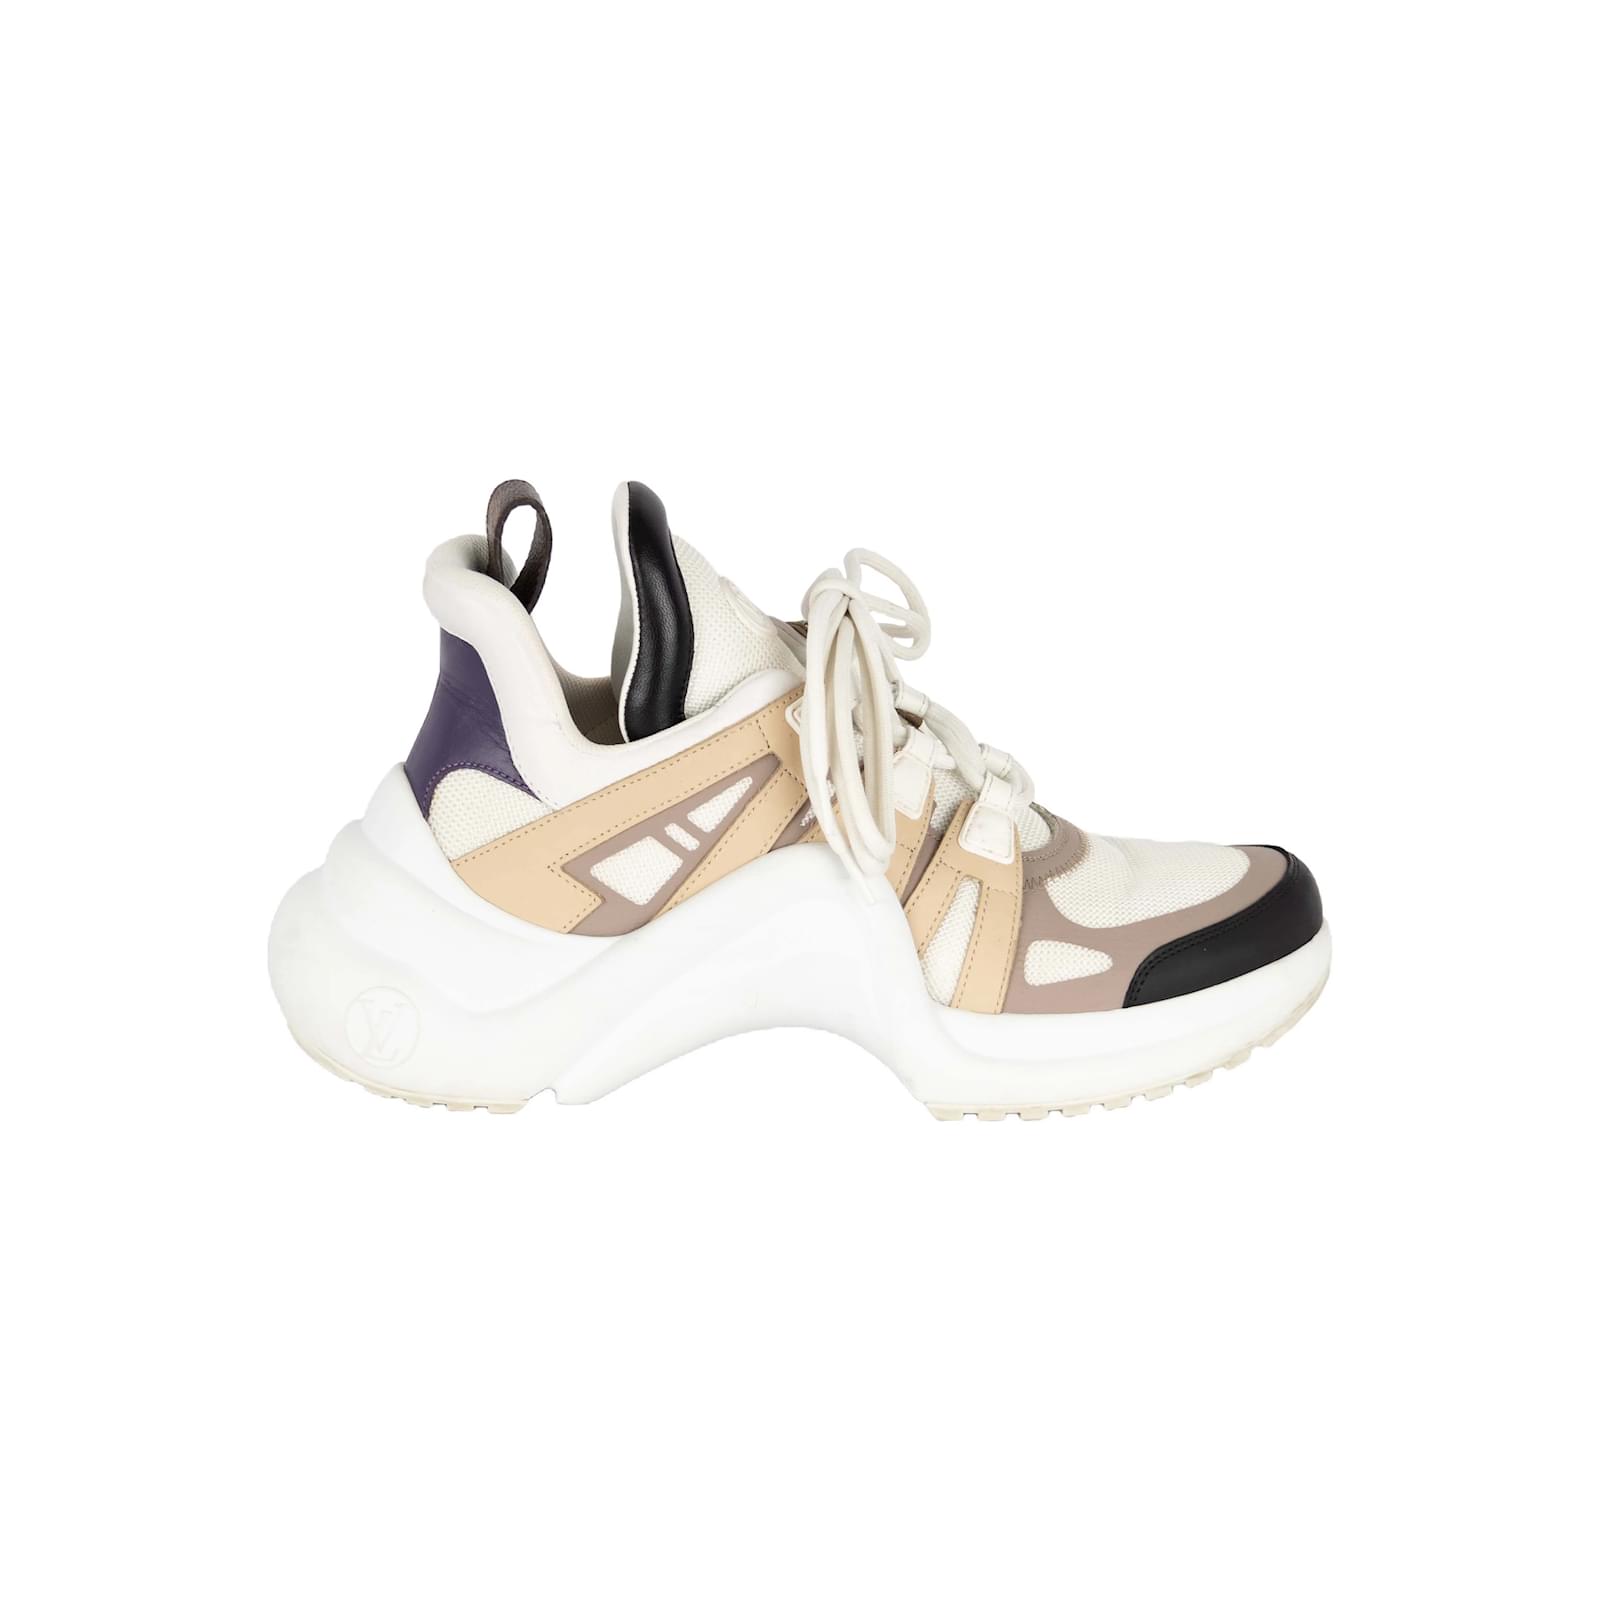 LV Archlight Trainers - Luxury Beige